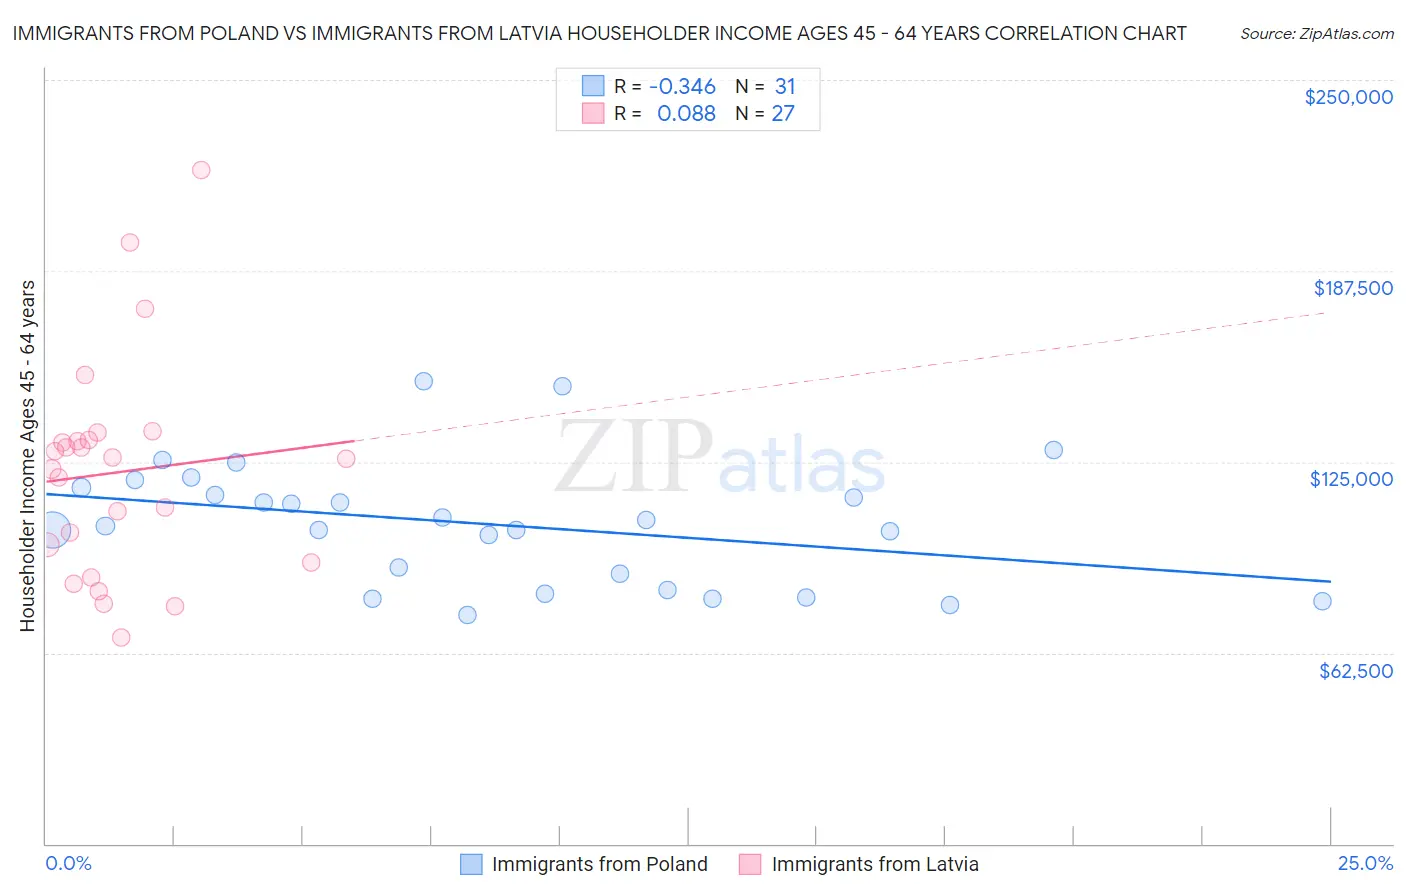 Immigrants from Poland vs Immigrants from Latvia Householder Income Ages 45 - 64 years